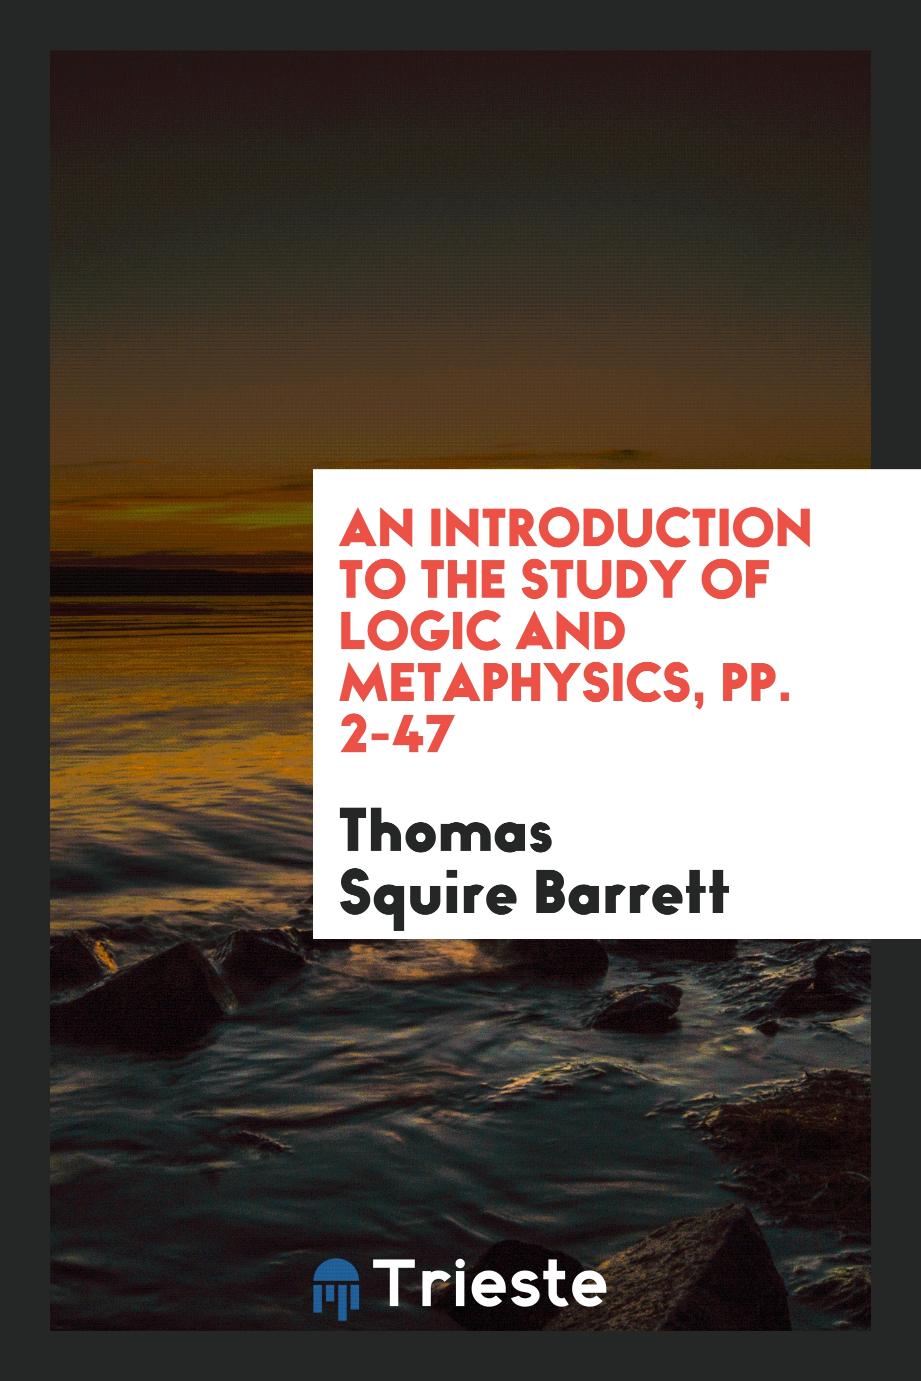 An Introduction to the Study of Logic and Metaphysics, pp. 2-47